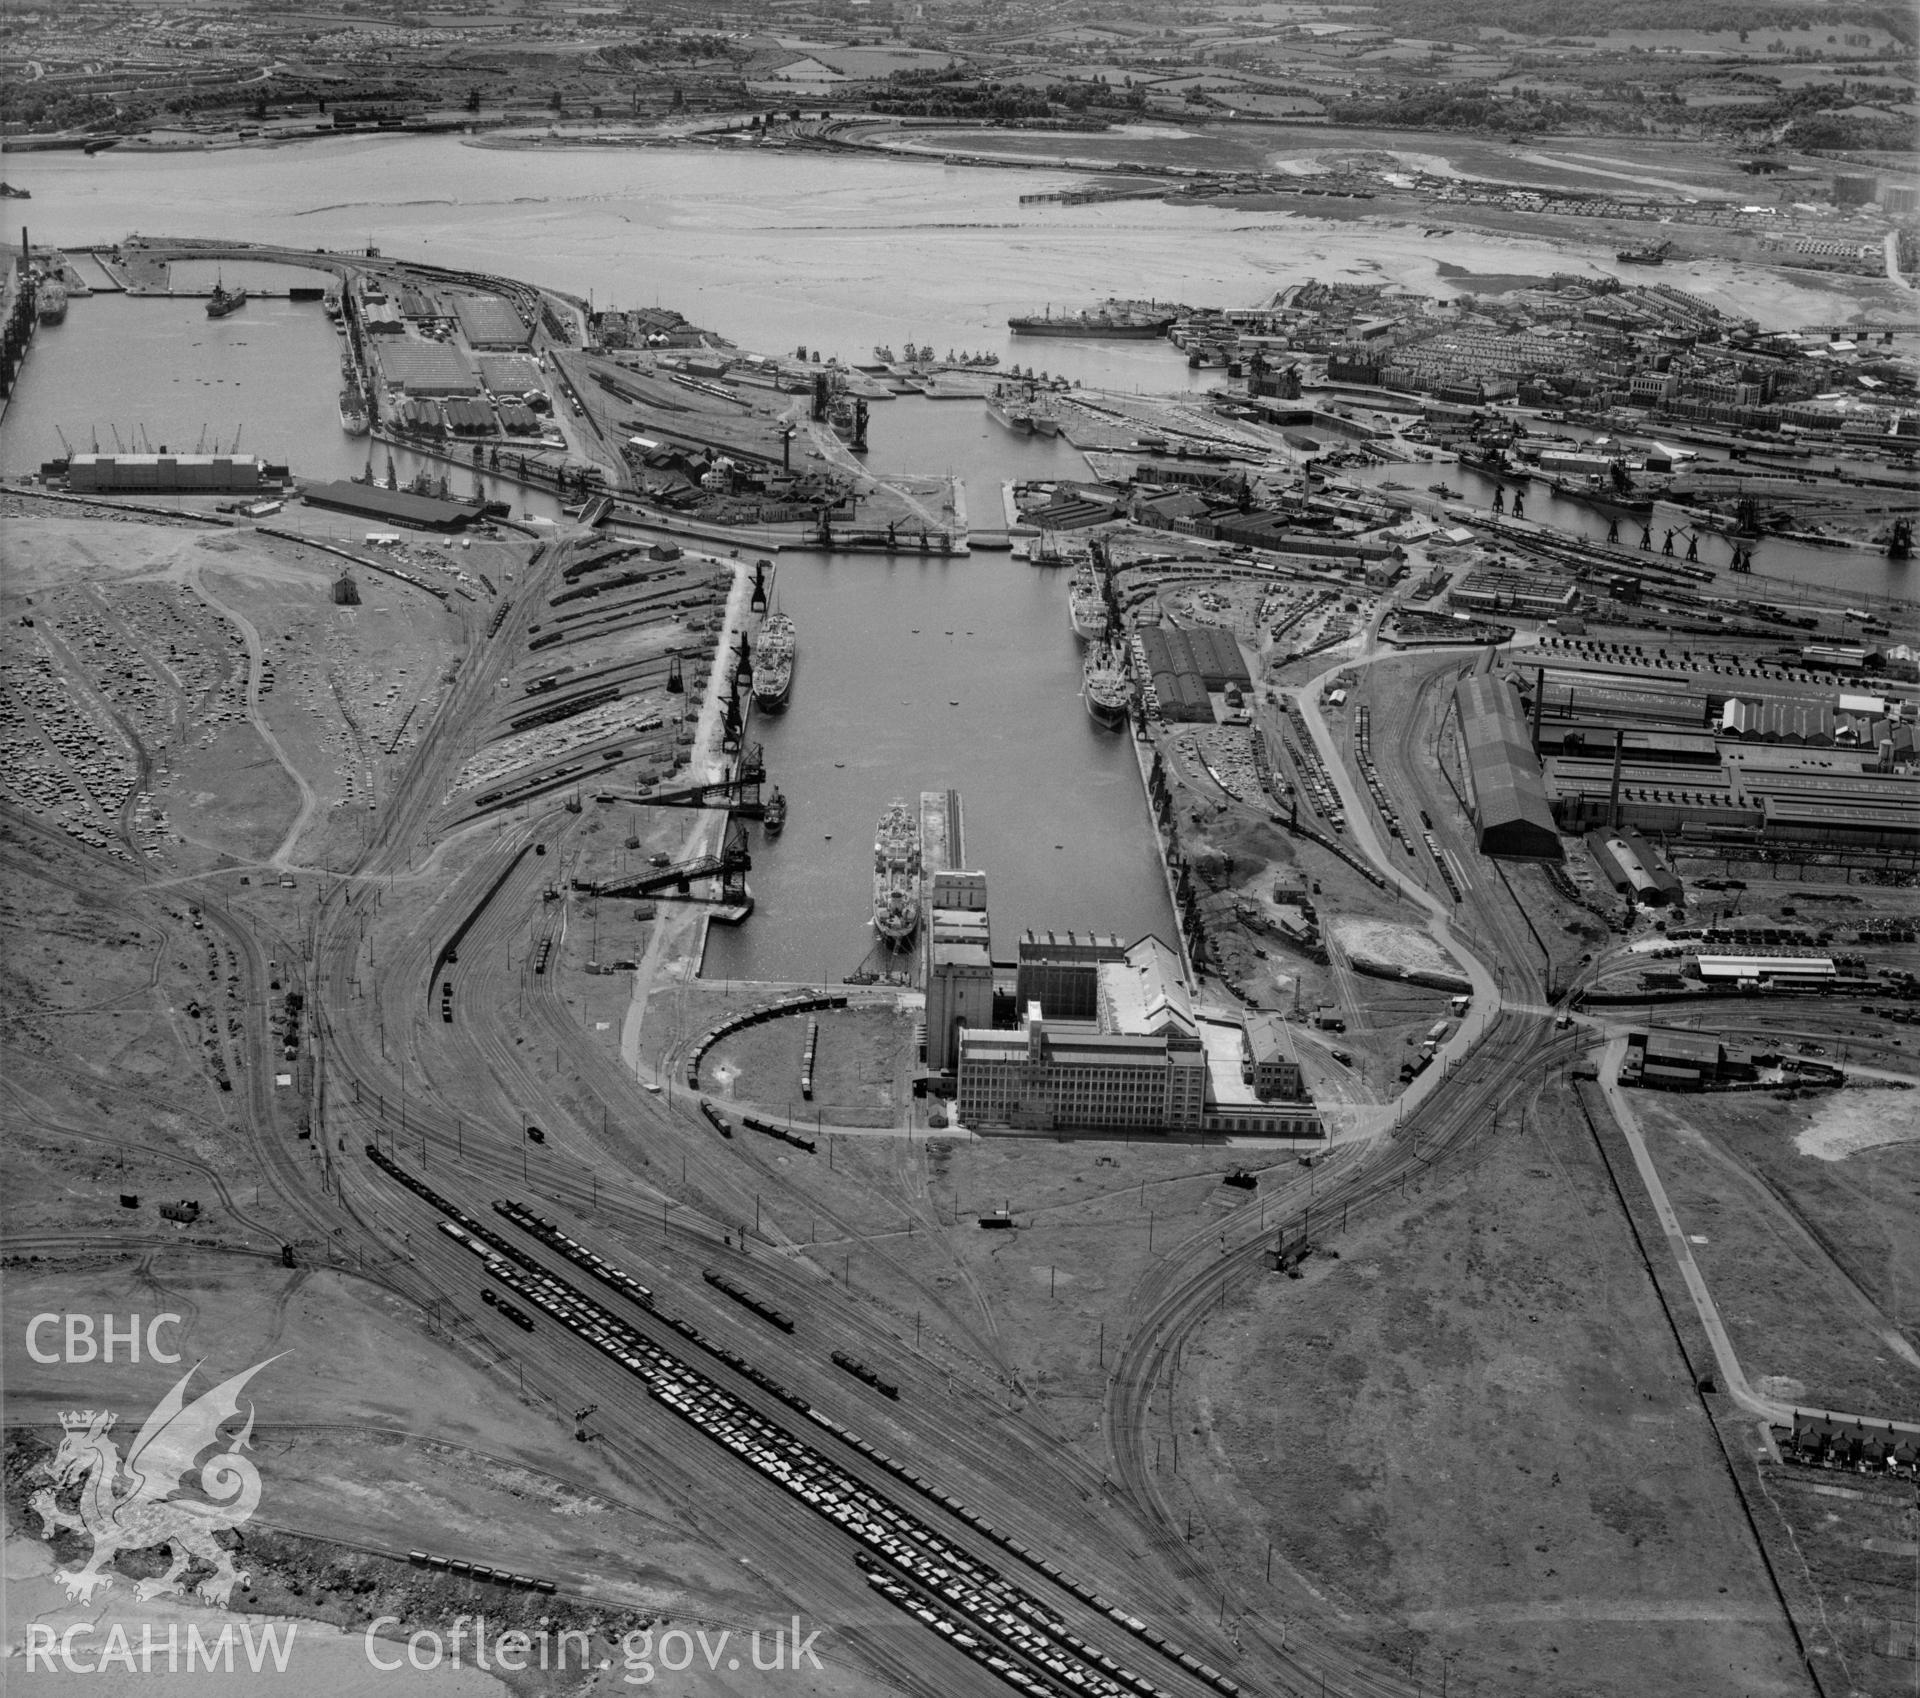 View of Cardiff showing docks